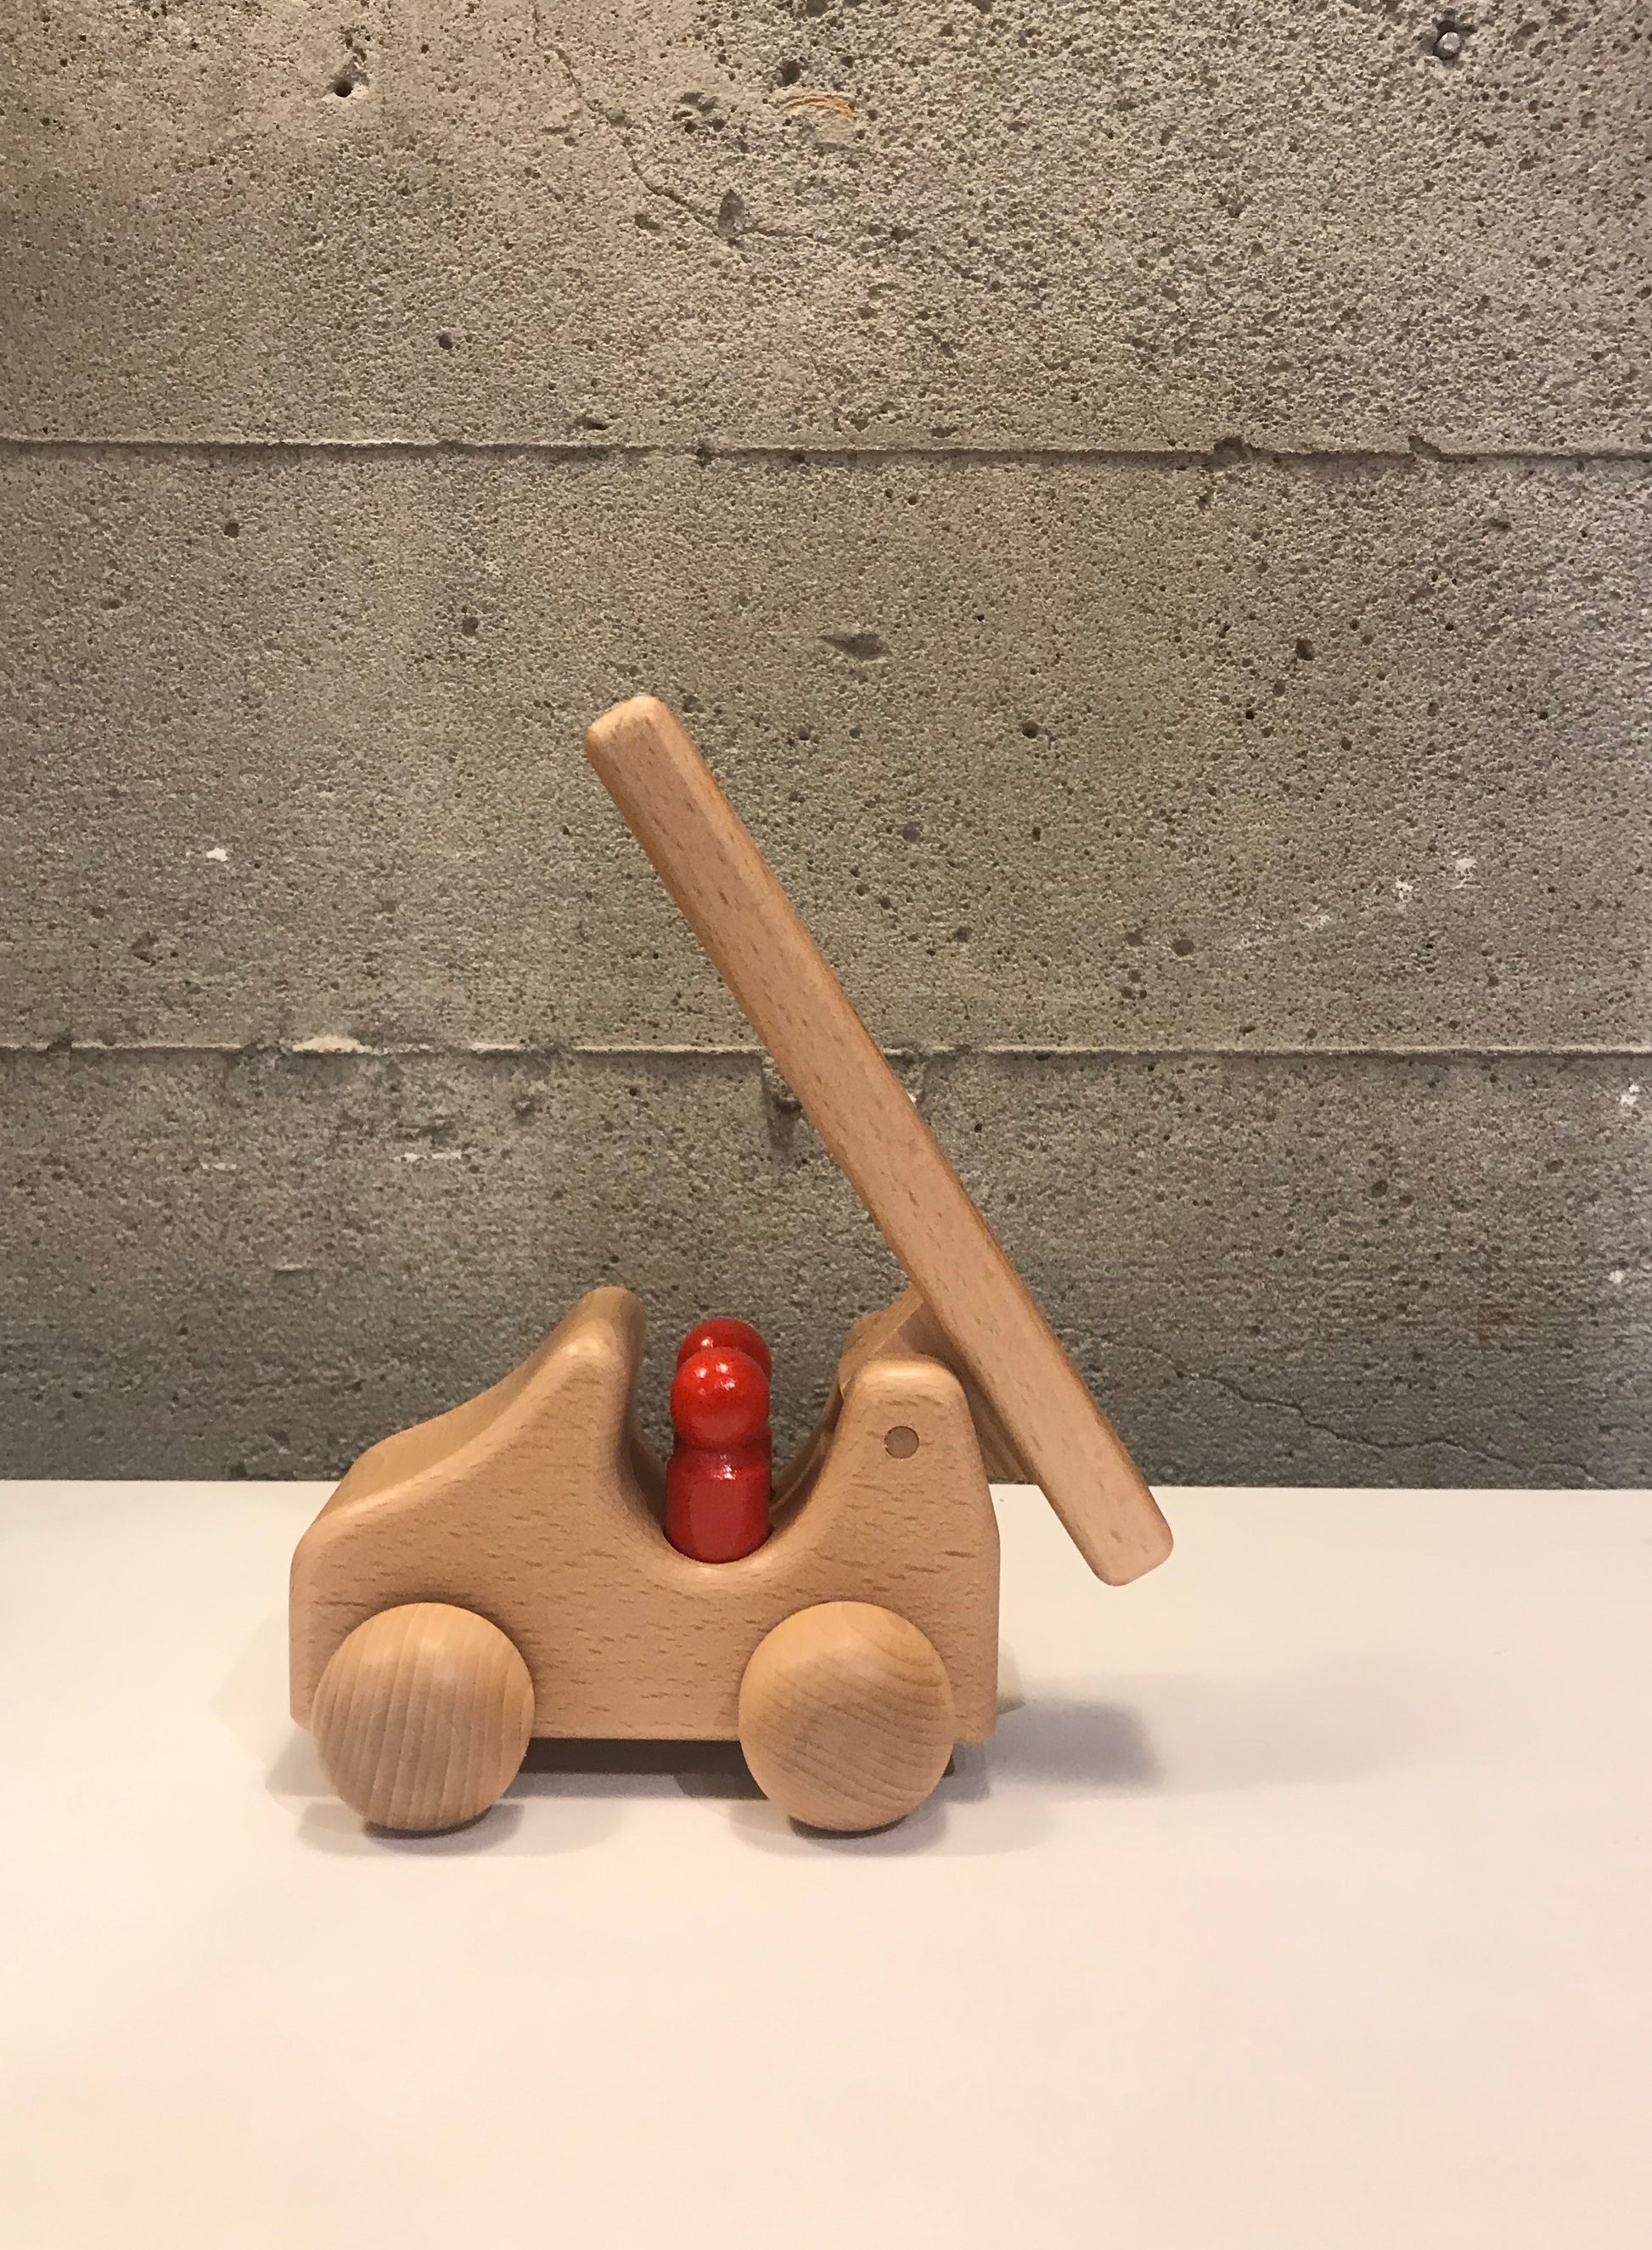 Wooden Fire Engine with Two People